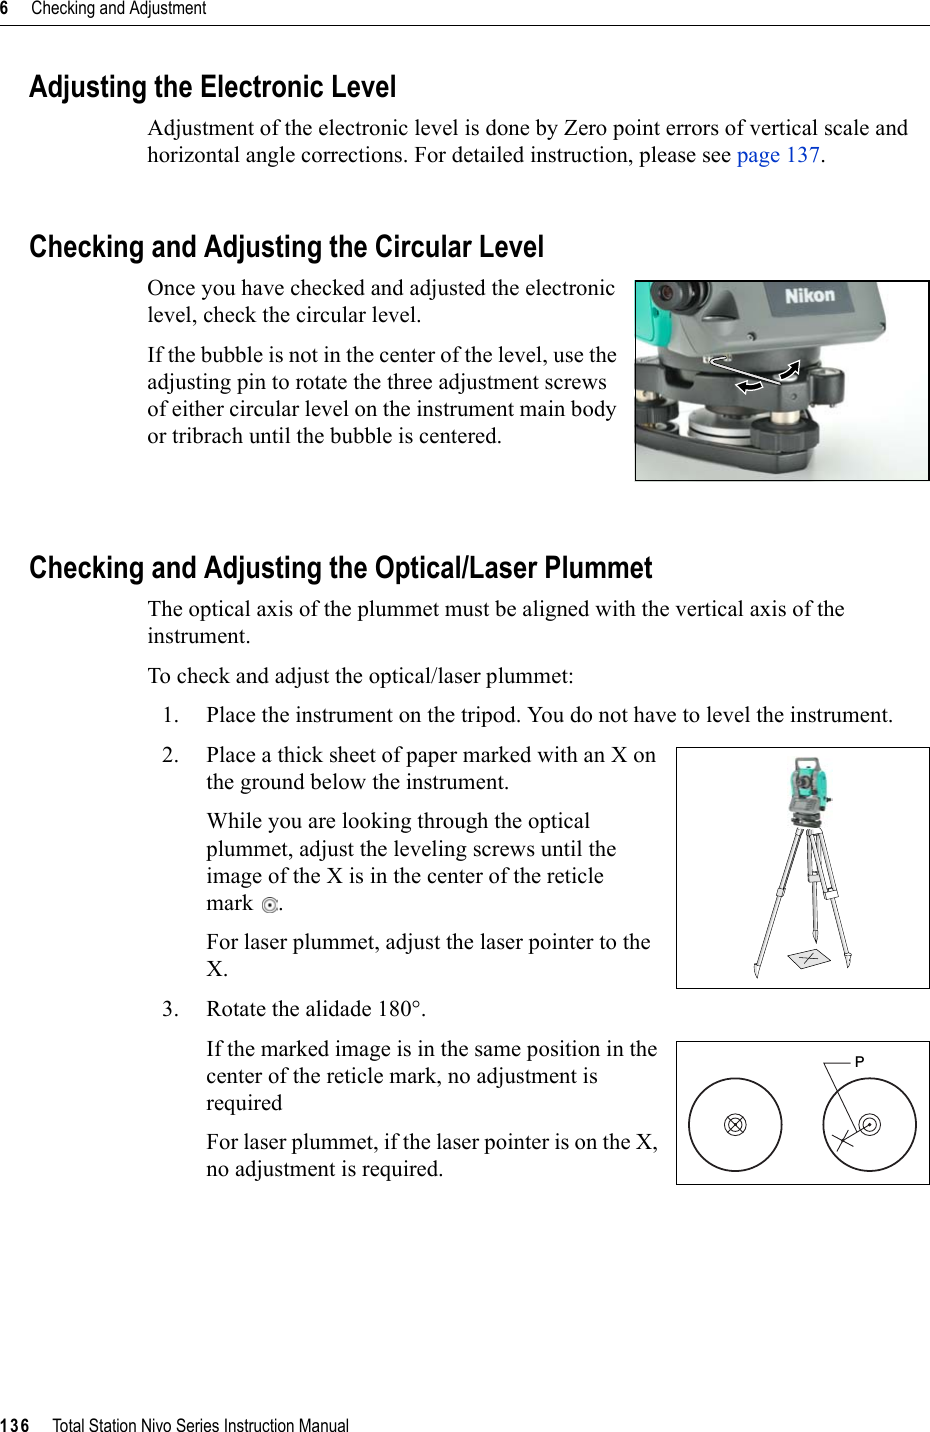 6     Checking and Adjustment136     Total Station Nivo Series Instruction ManualAdjusting the Electronic LevelAdjustment of the electronic level is done by Zero point errors of vertical scale and horizontal angle corrections. For detailed instruction, please see page 137.Checking and Adjusting the Circular LevelOnce you have checked and adjusted the electronic level, check the circular level. If the bubble is not in the center of the level, use the adjusting pin to rotate the three adjustment screws of either circular level on the instrument main body or tribrach until the bubble is centered.Checking and Adjusting the Optical/Laser PlummetThe optical axis of the plummet must be aligned with the vertical axis of the instrument.To check and adjust the optical/laser plummet:1. Place the instrument on the tripod. You do not have to level the instrument.2. Place a thick sheet of paper marked with an X on the ground below the instrument.While you are looking through the optical plummet, adjust the leveling screws until the image of the X is in the center of the reticle mark .For laser plummet, adjust the laser pointer to the X.3. Rotate the alidade 180°.If the marked image is in the same position in the center of the reticle mark, no adjustment is requiredFor laser plummet, if the laser pointer is on the X, no adjustment is required.P